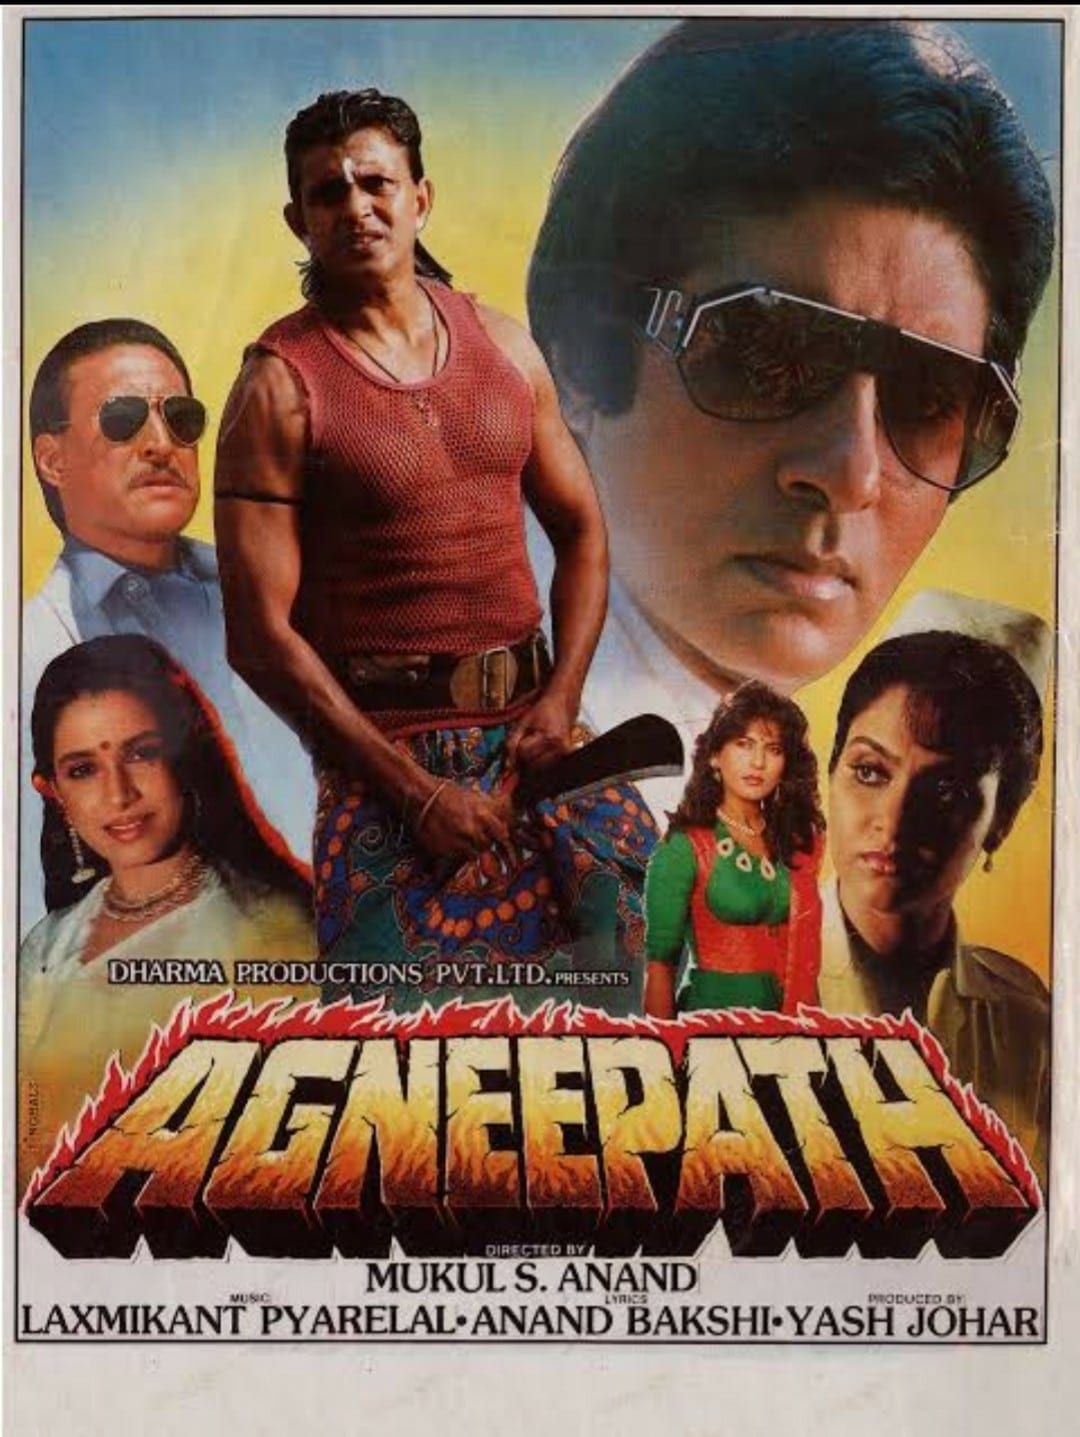 Poster for the movie "Agneepath"